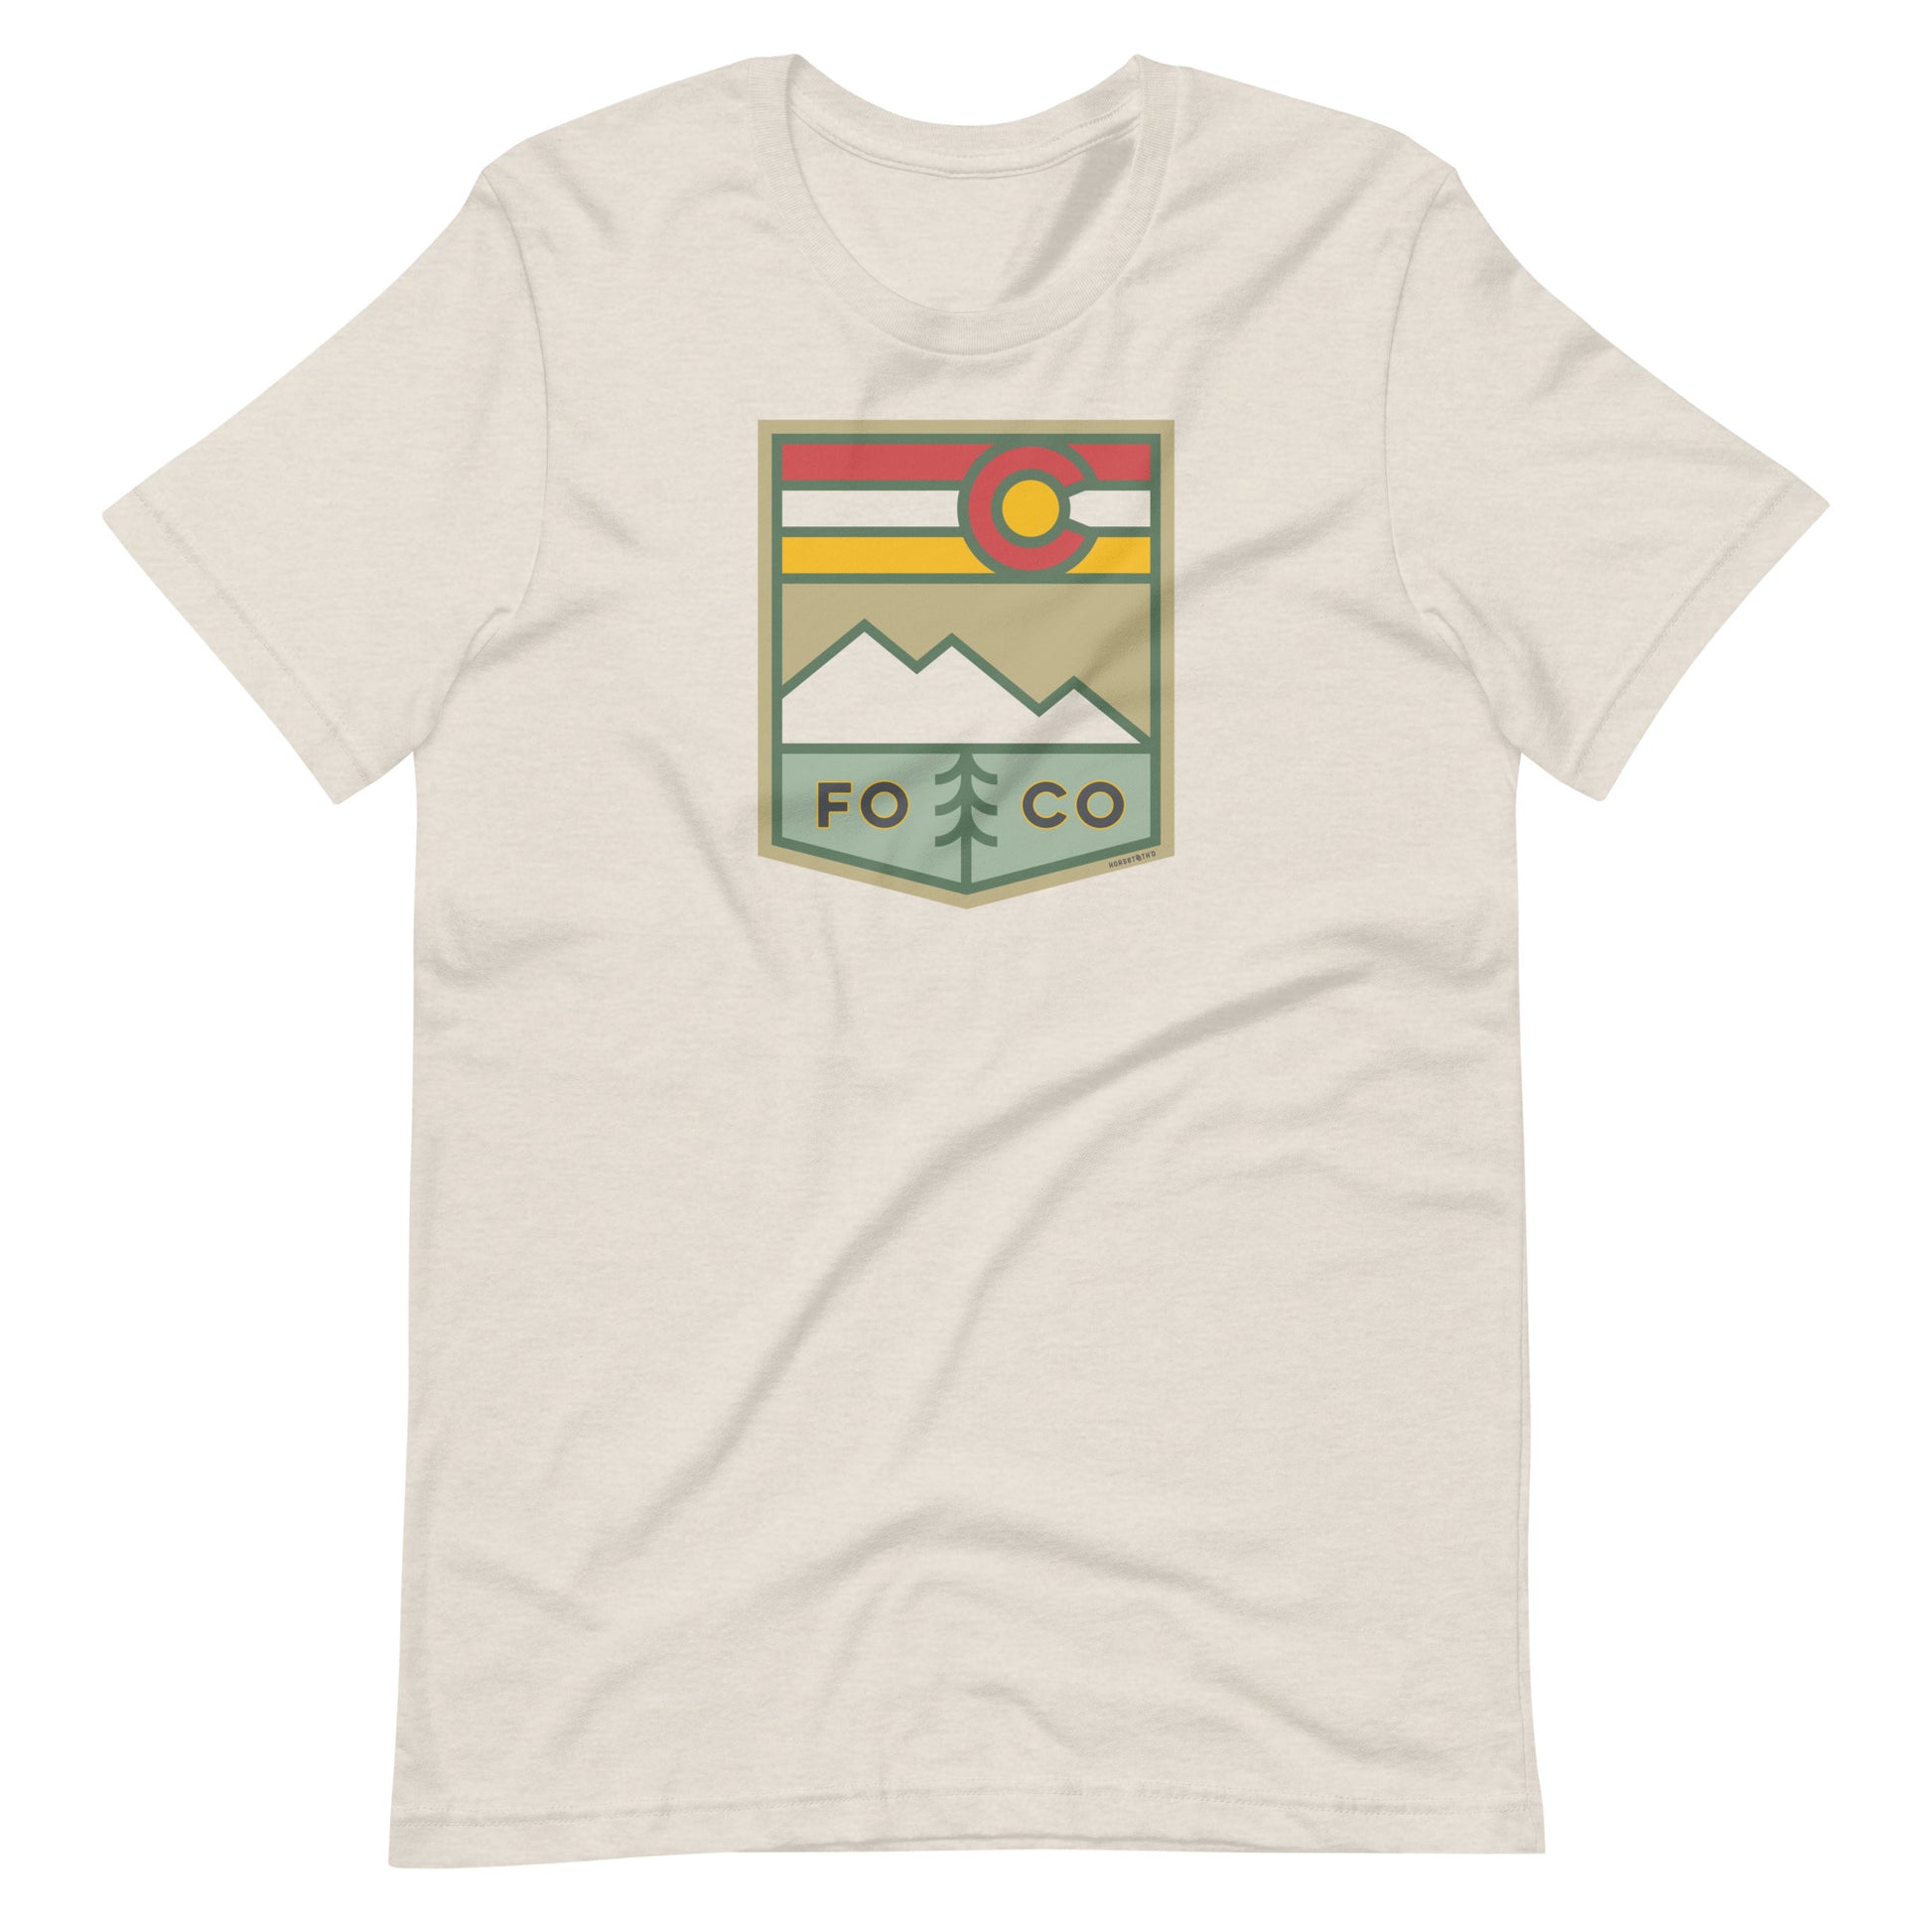 Athletic fit t-shirt by Horsetooth'd featuring a bold design celebrating the vibe of Fort Collins, Colorado.